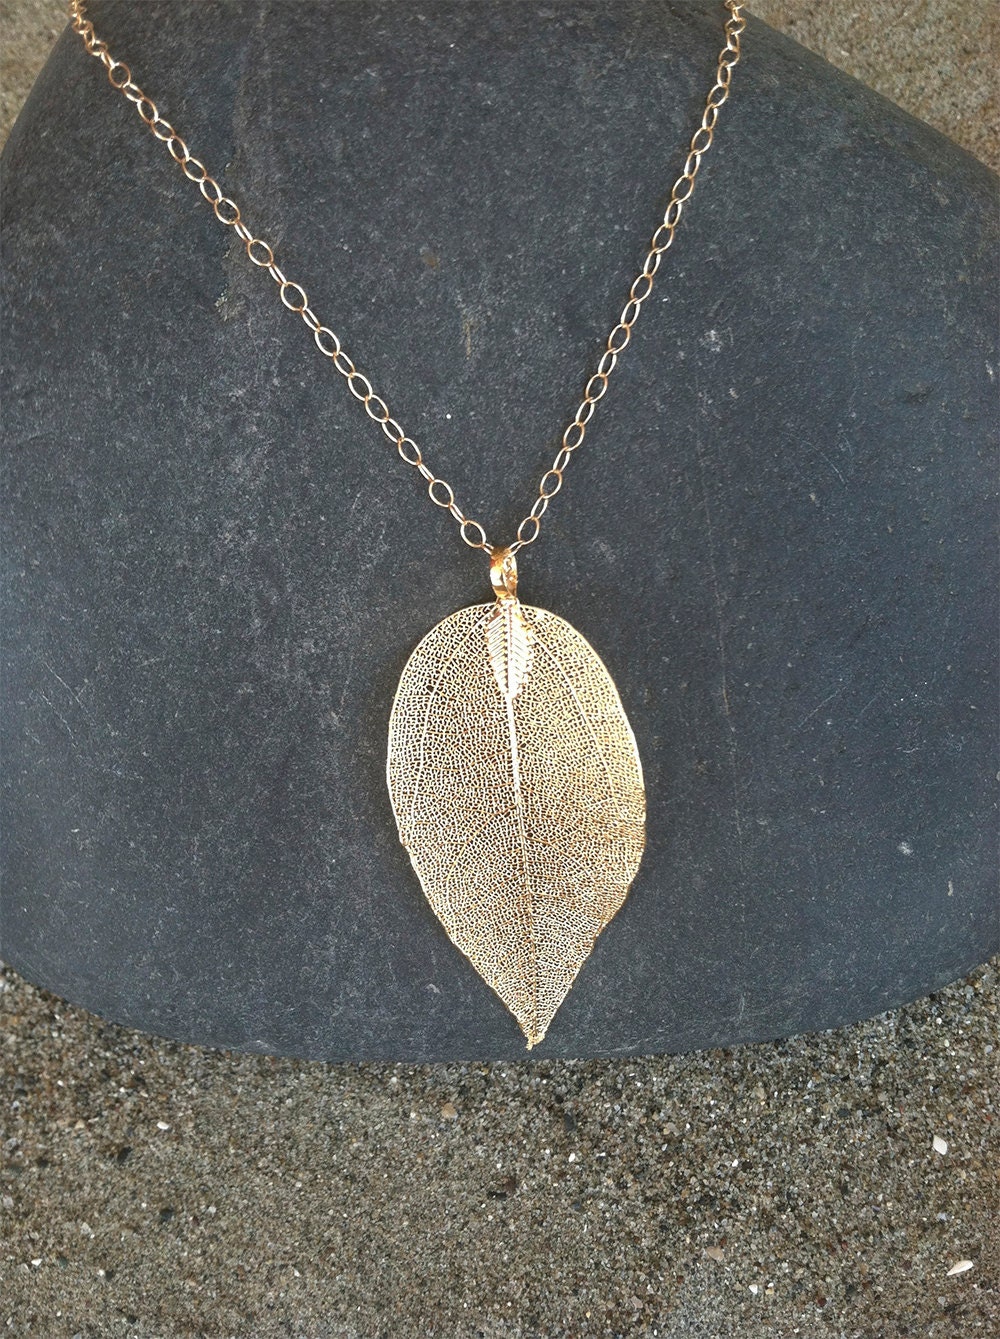 Small Gold or Silver Leaf Pendant Necklace Leaf by JadedSLO